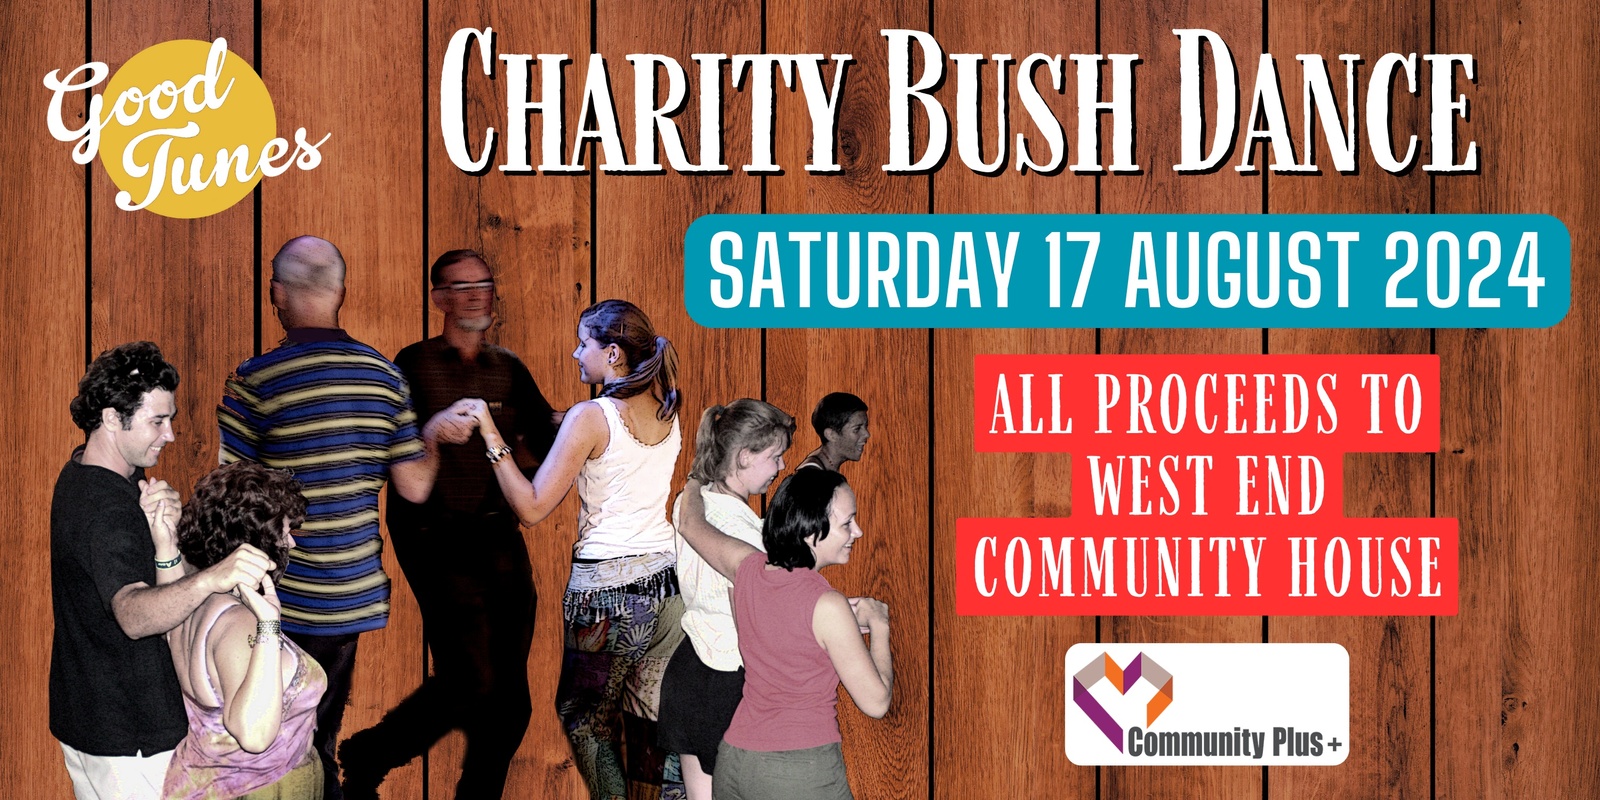 Banner image for Charity Bush Dance for 17 August 2024 for West End Community House